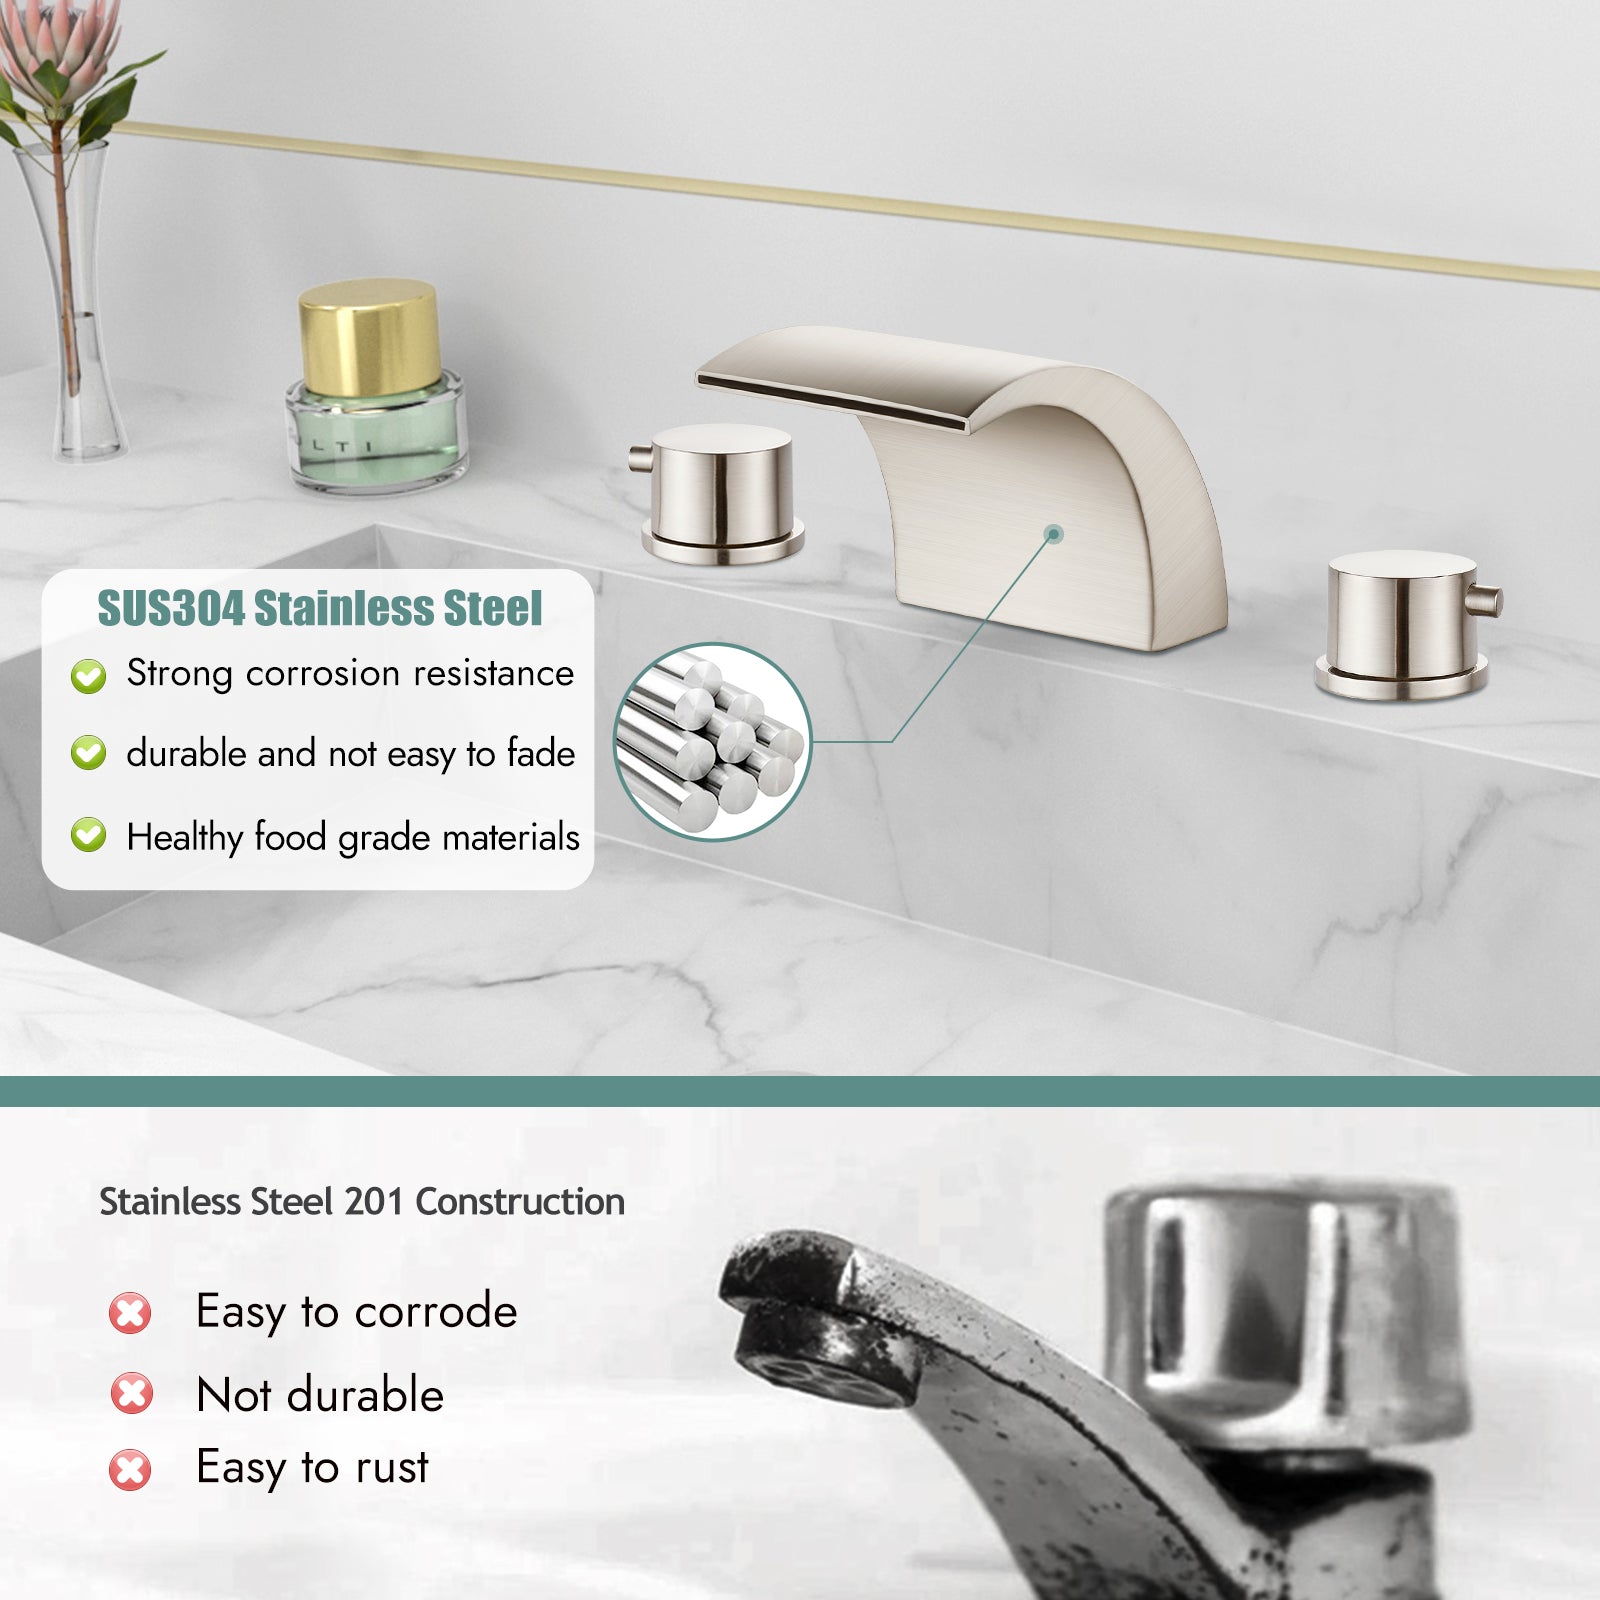 Heyalan Bathroom Widespread Sink Faucet Waterfall Spout 8 16 Inch Dual Handles Three Holes Deck Mount Pop Up Drain with Overflow Bathtub Basin Mixer Tap Commercial